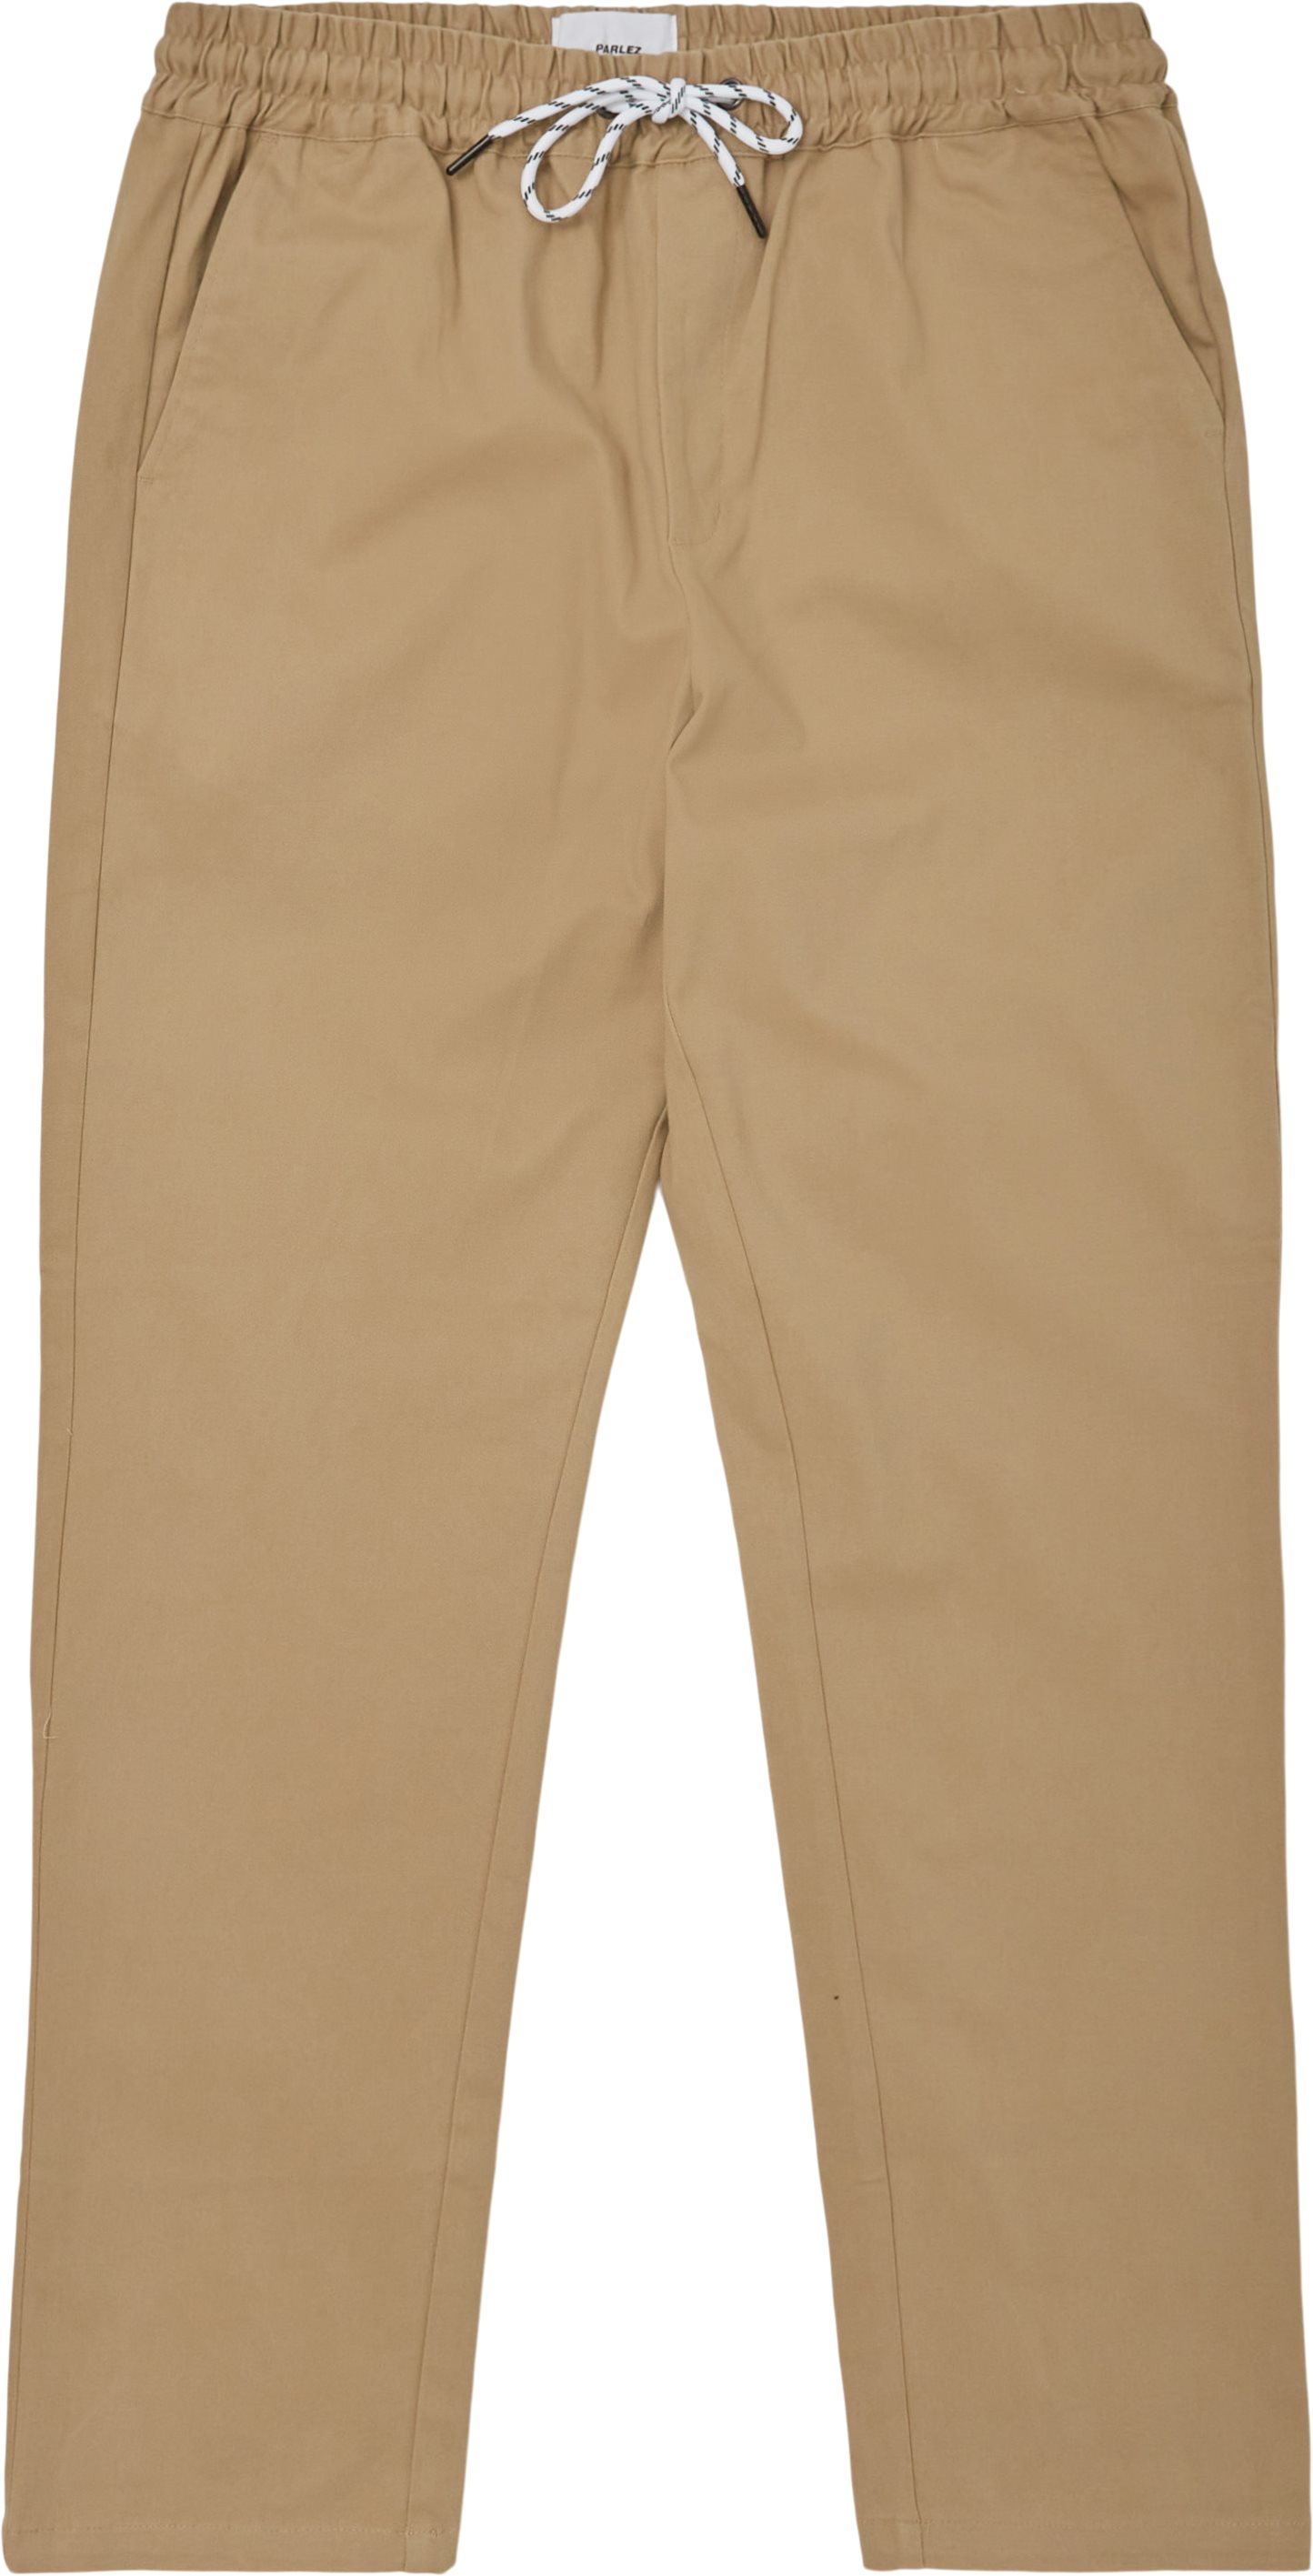 Spring Trousers  - Trousers - Regular fit - Sand